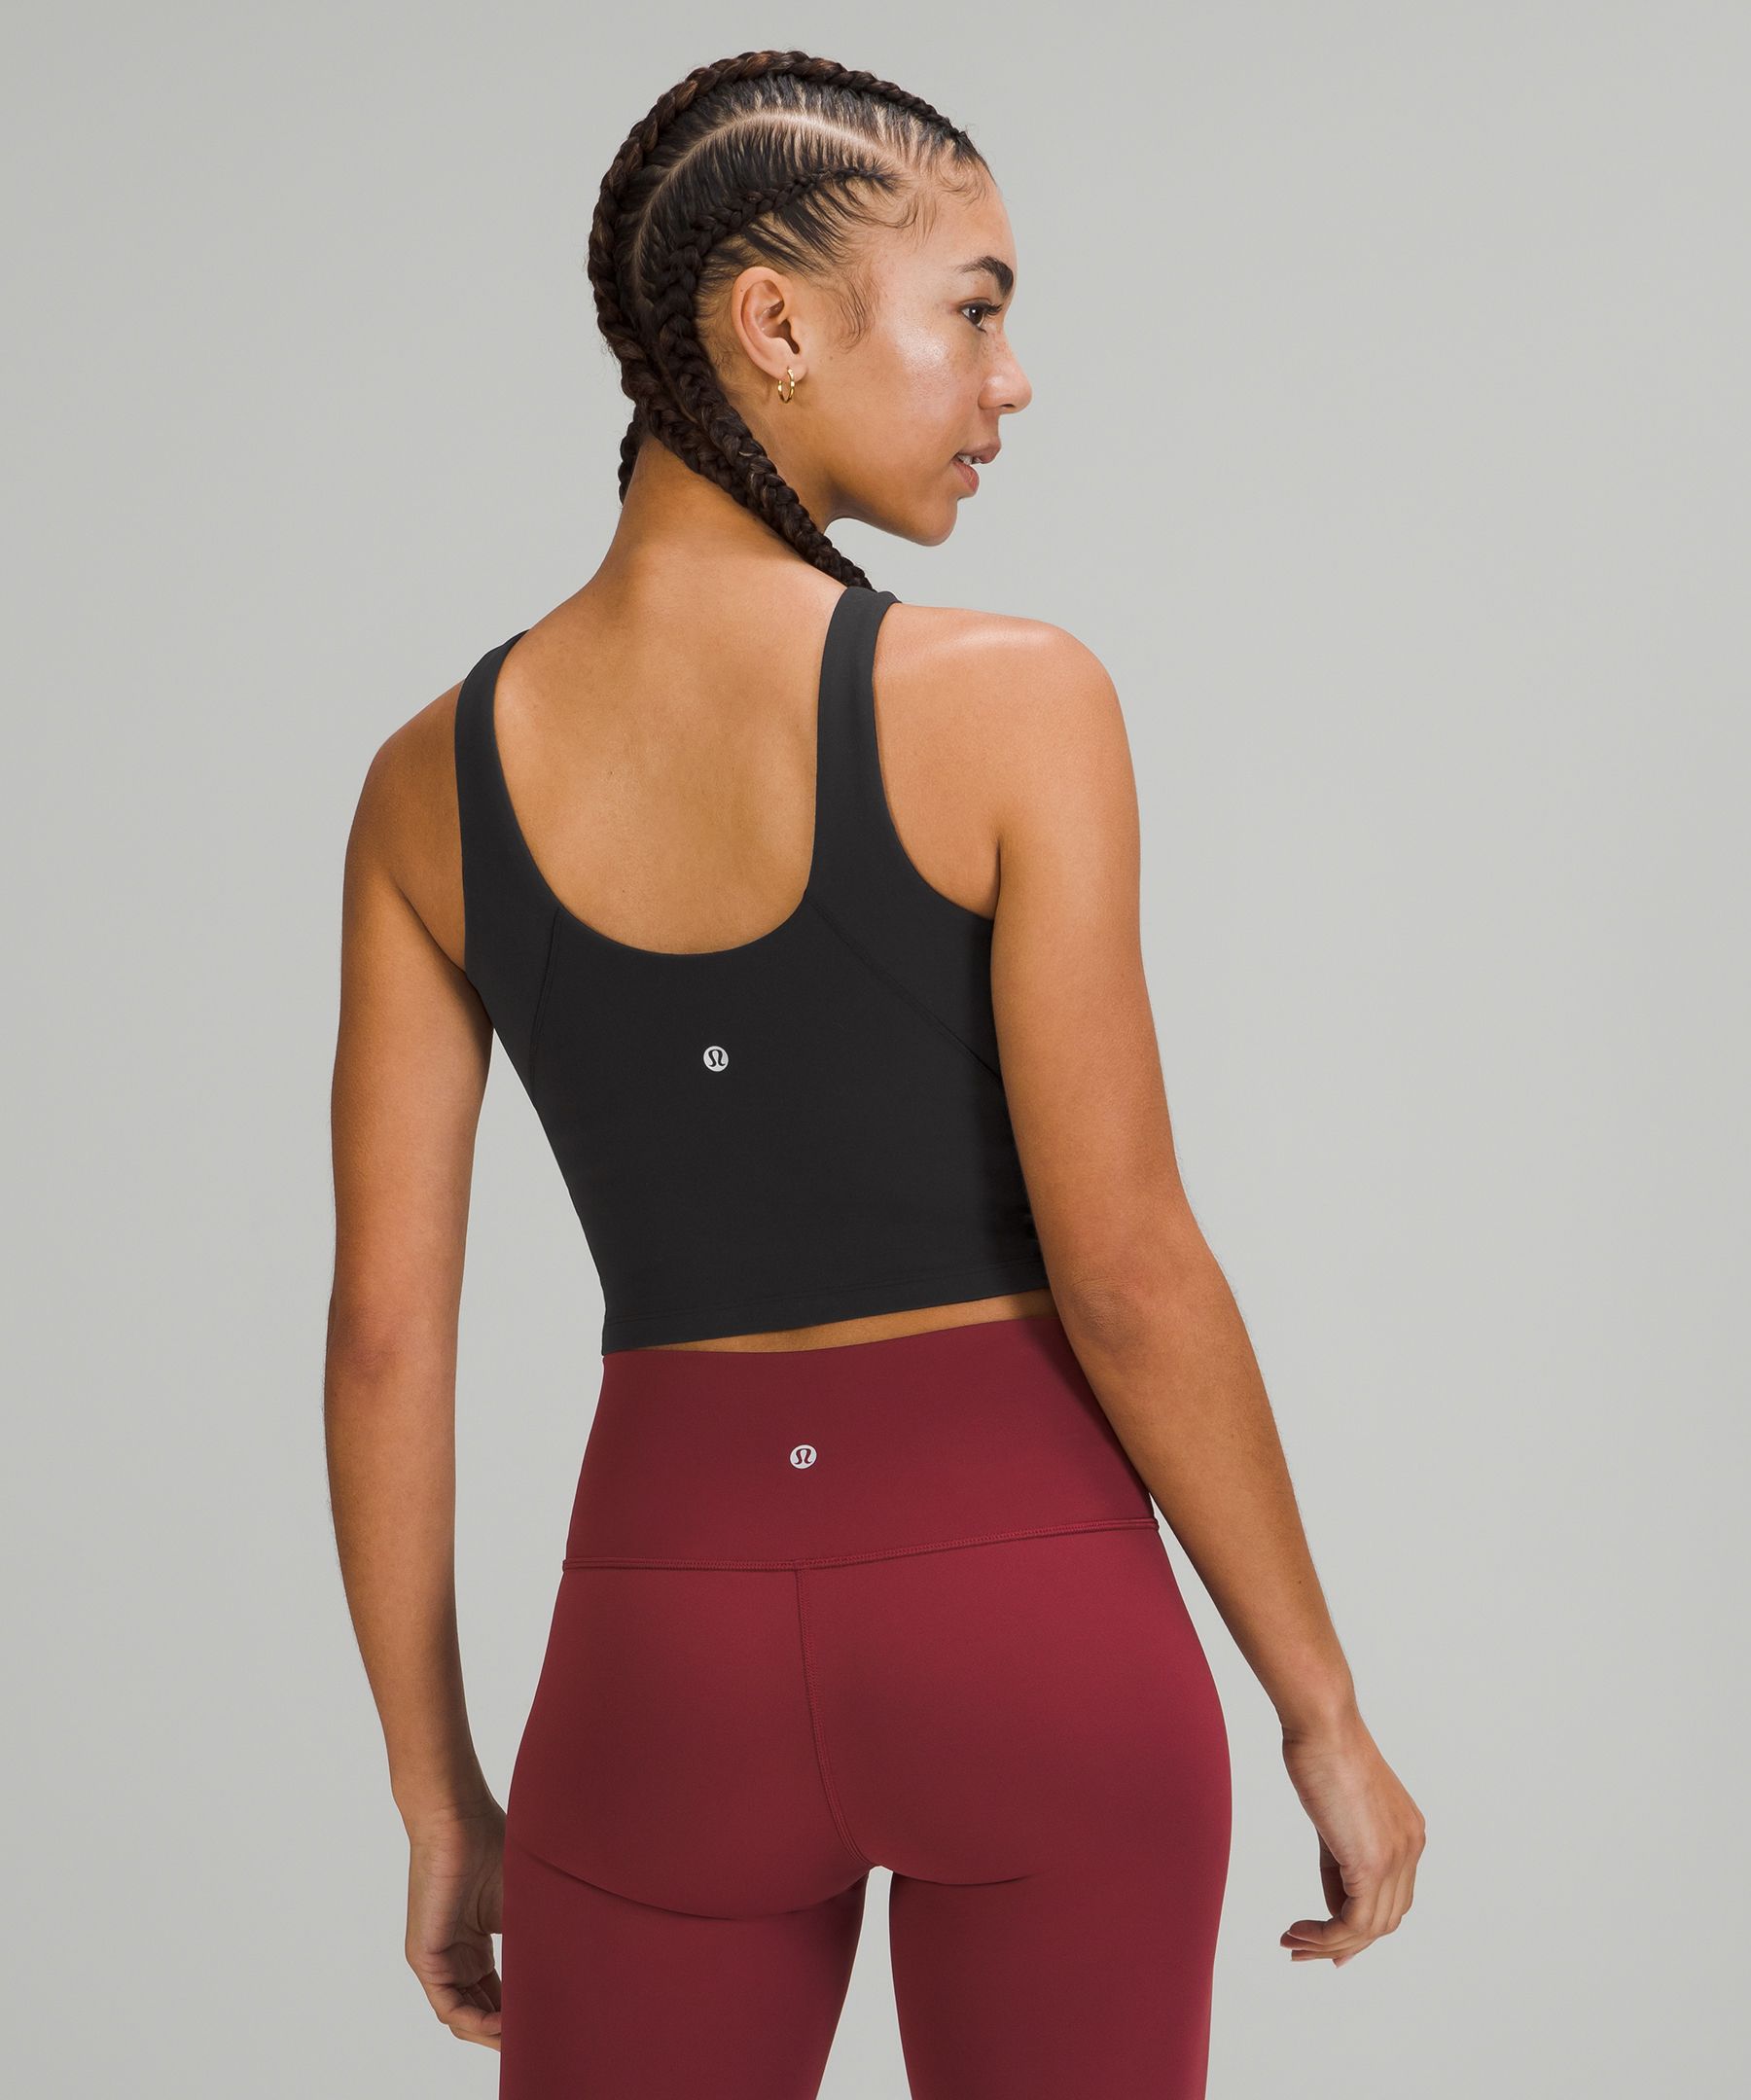 Lululemon Align Tank White Size 6 - $46 (32% Off Retail) - From